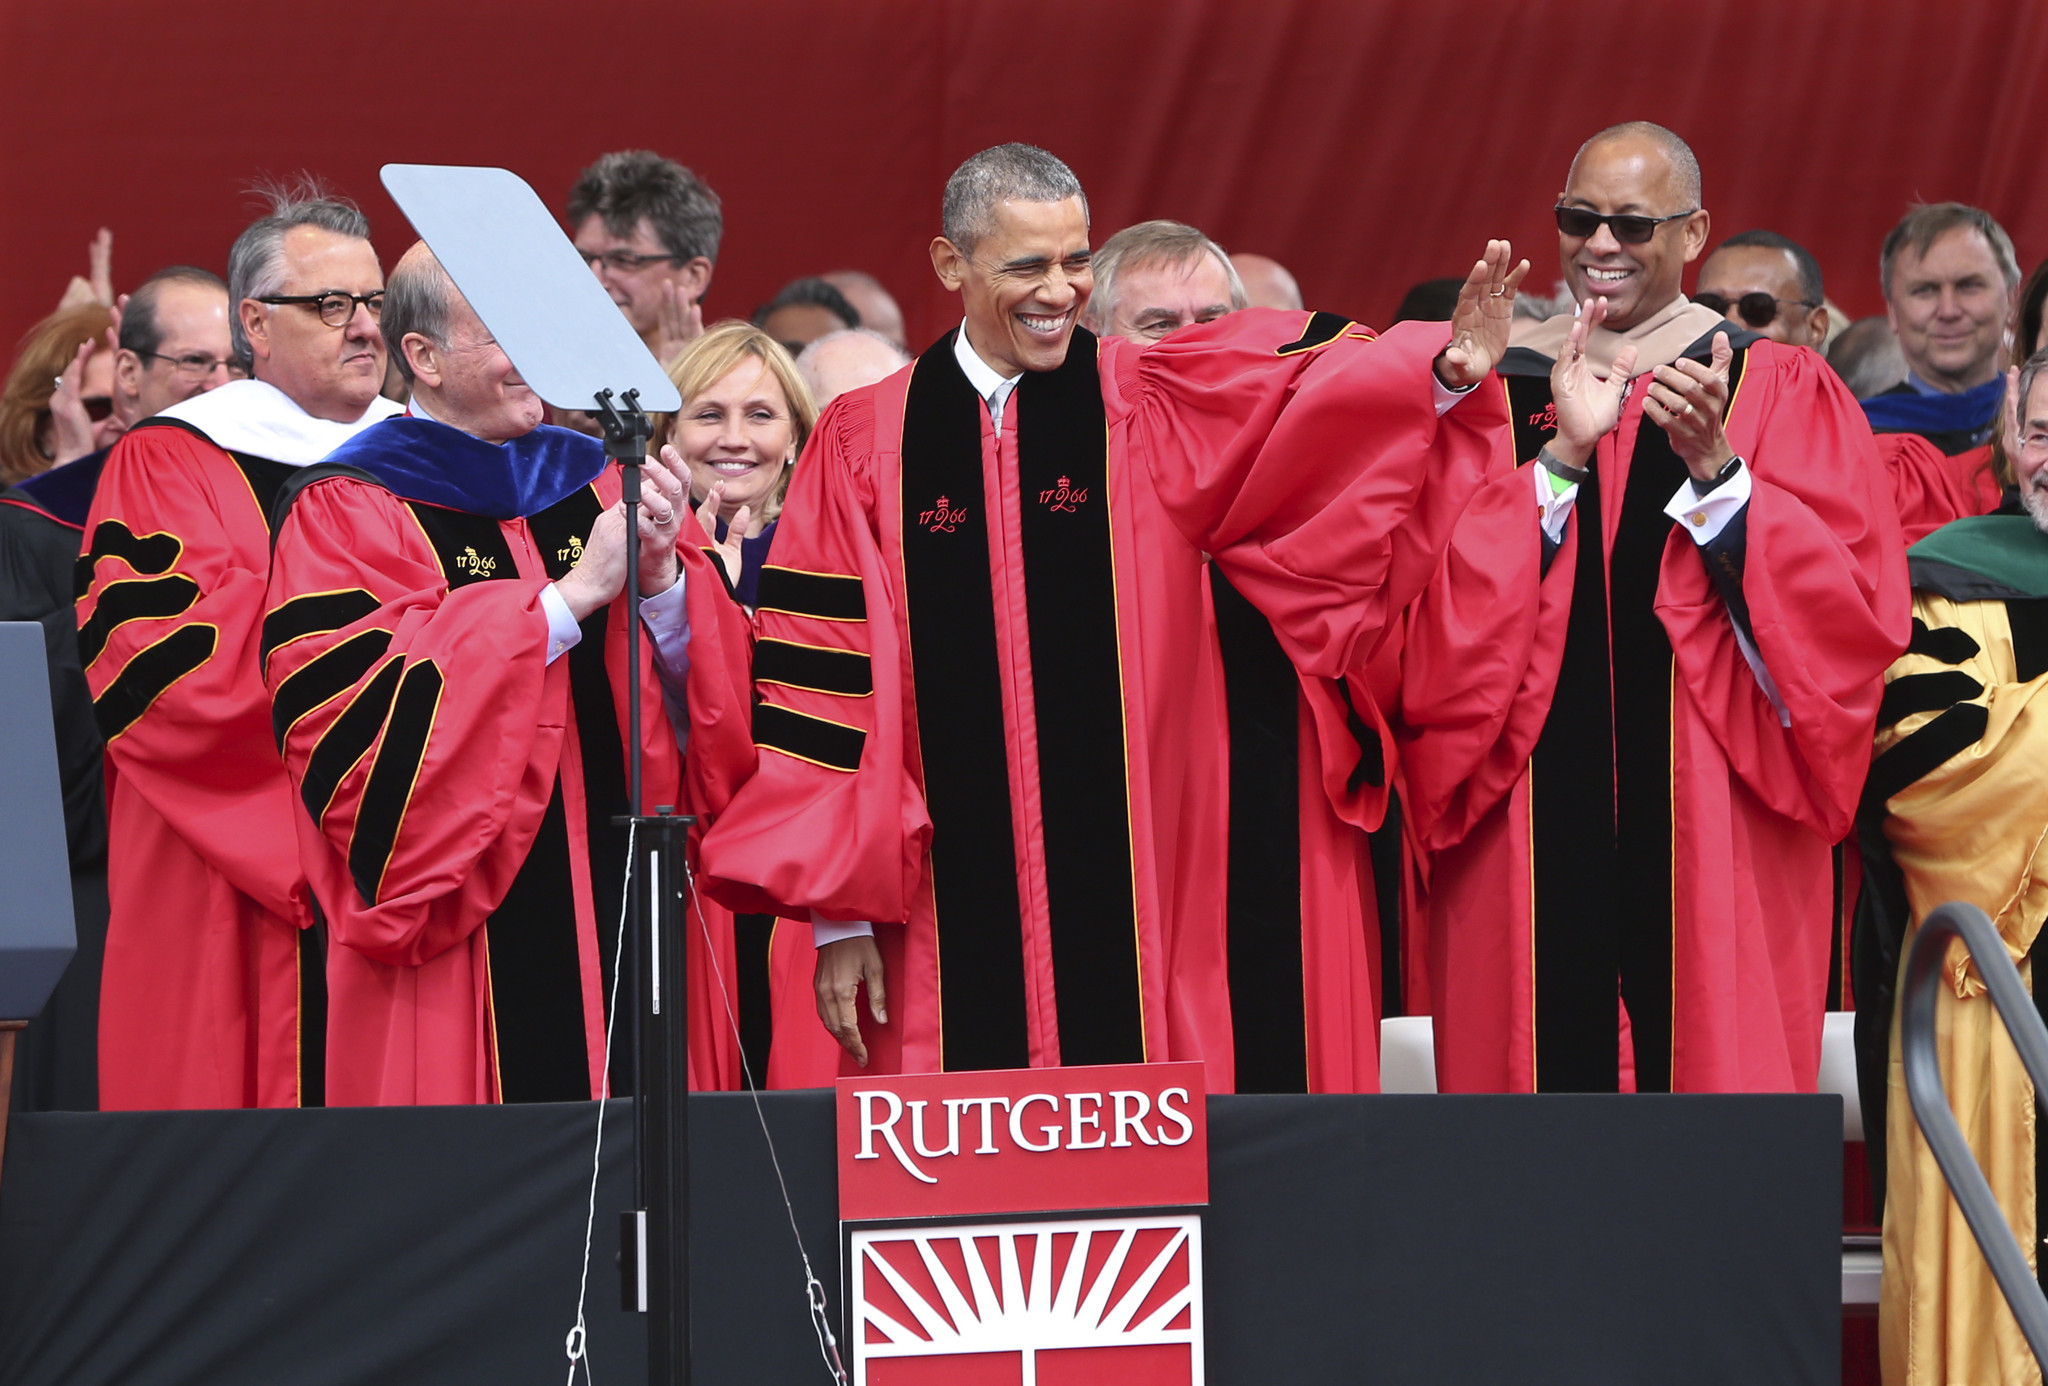 Obama assails Trump's wall in Rutgers commencement speech Chicago Tribune